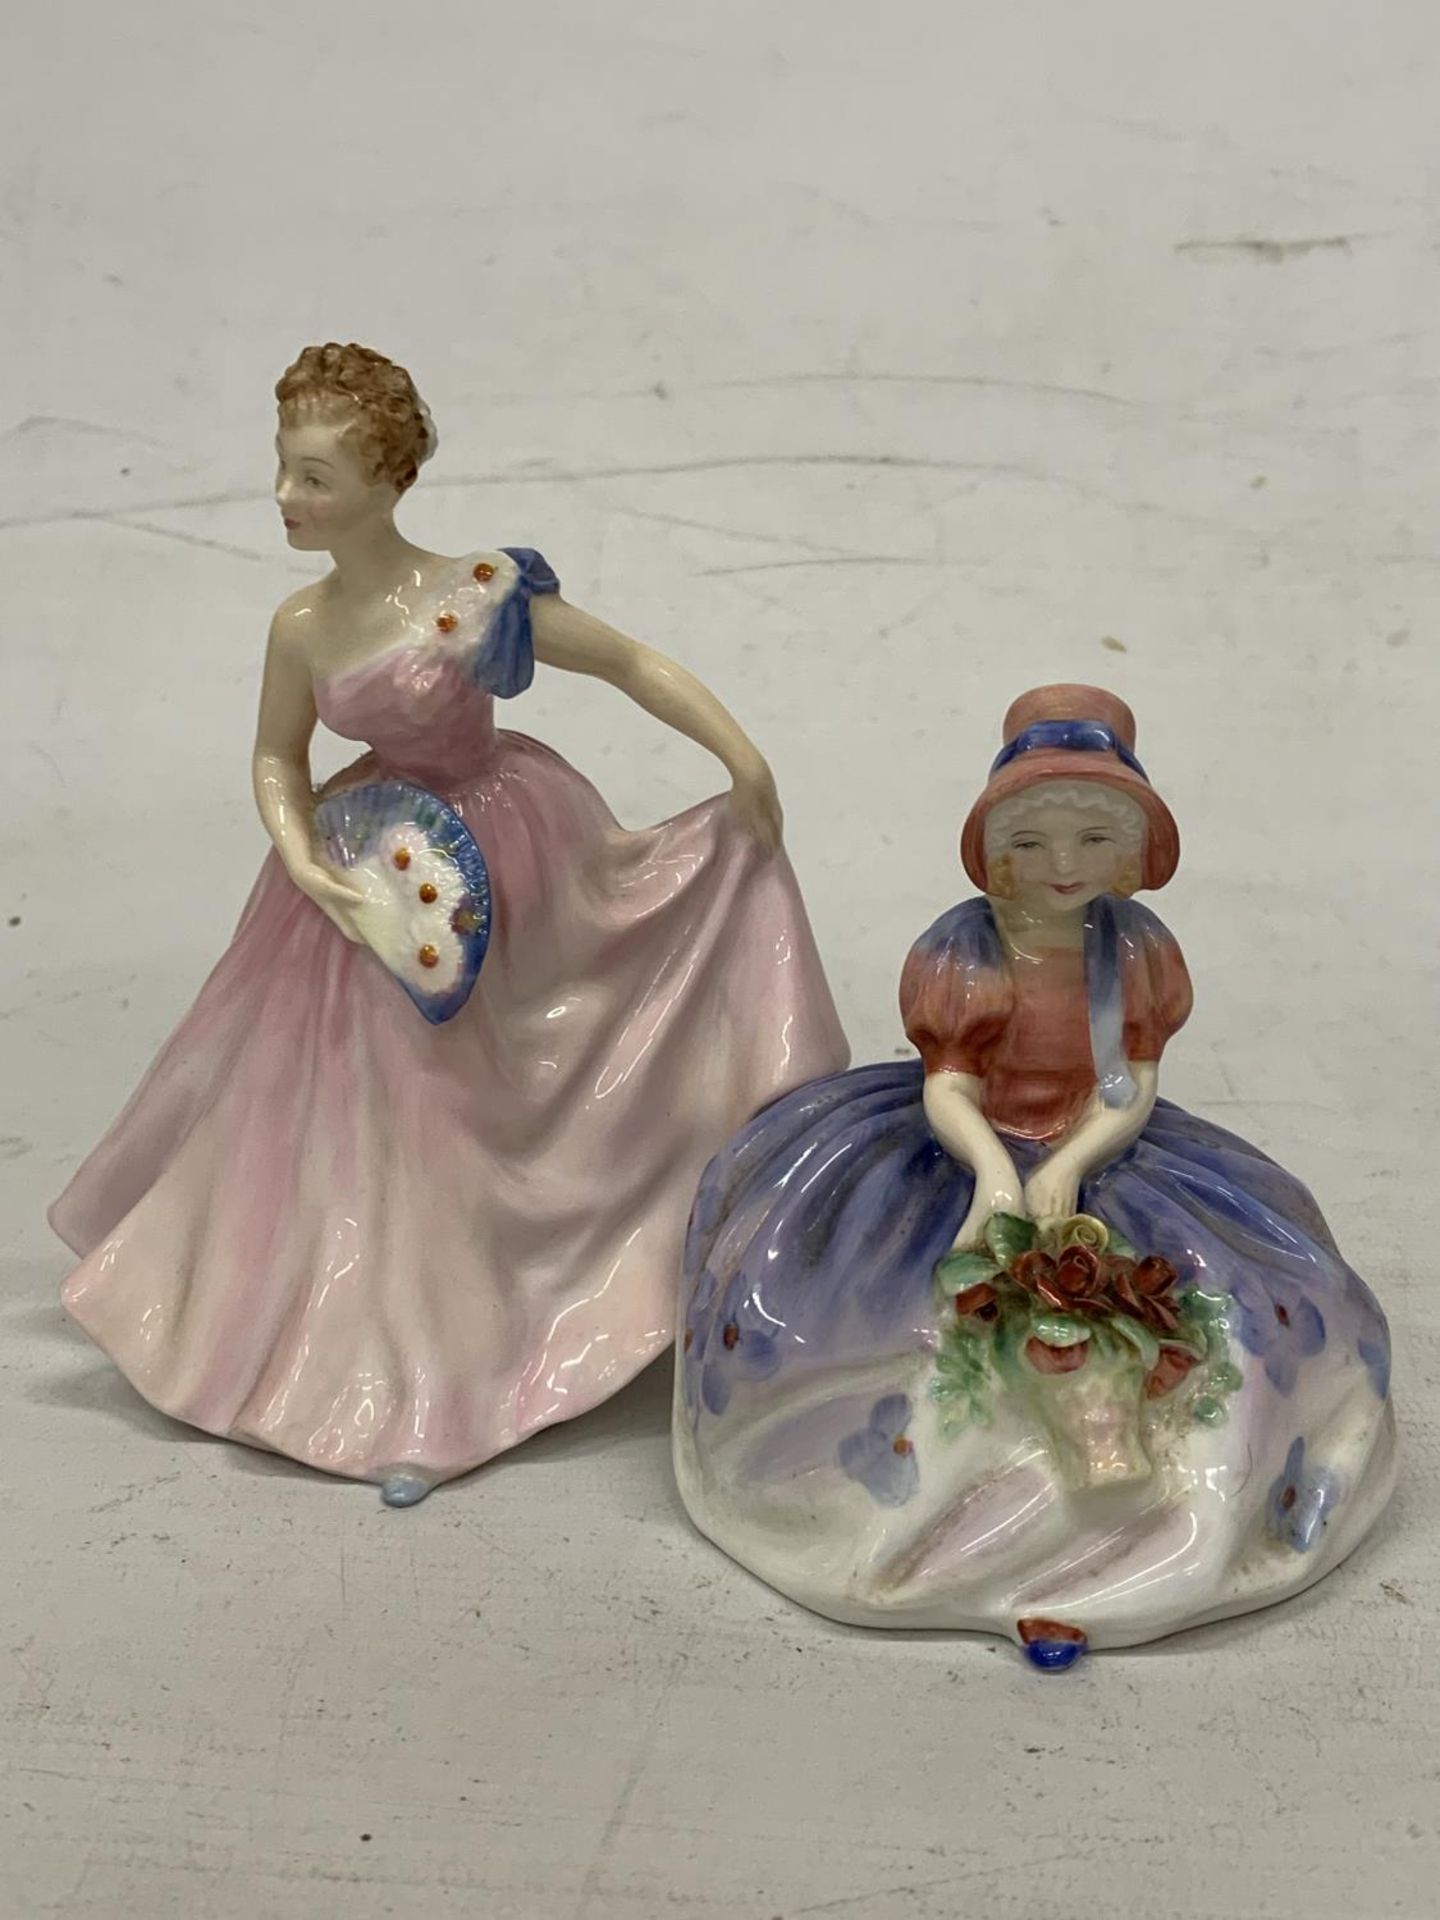 TWO ROYAL DOULTON FIGURINES "INVITATION" HN 2170 AND "MONICA" HN 1467